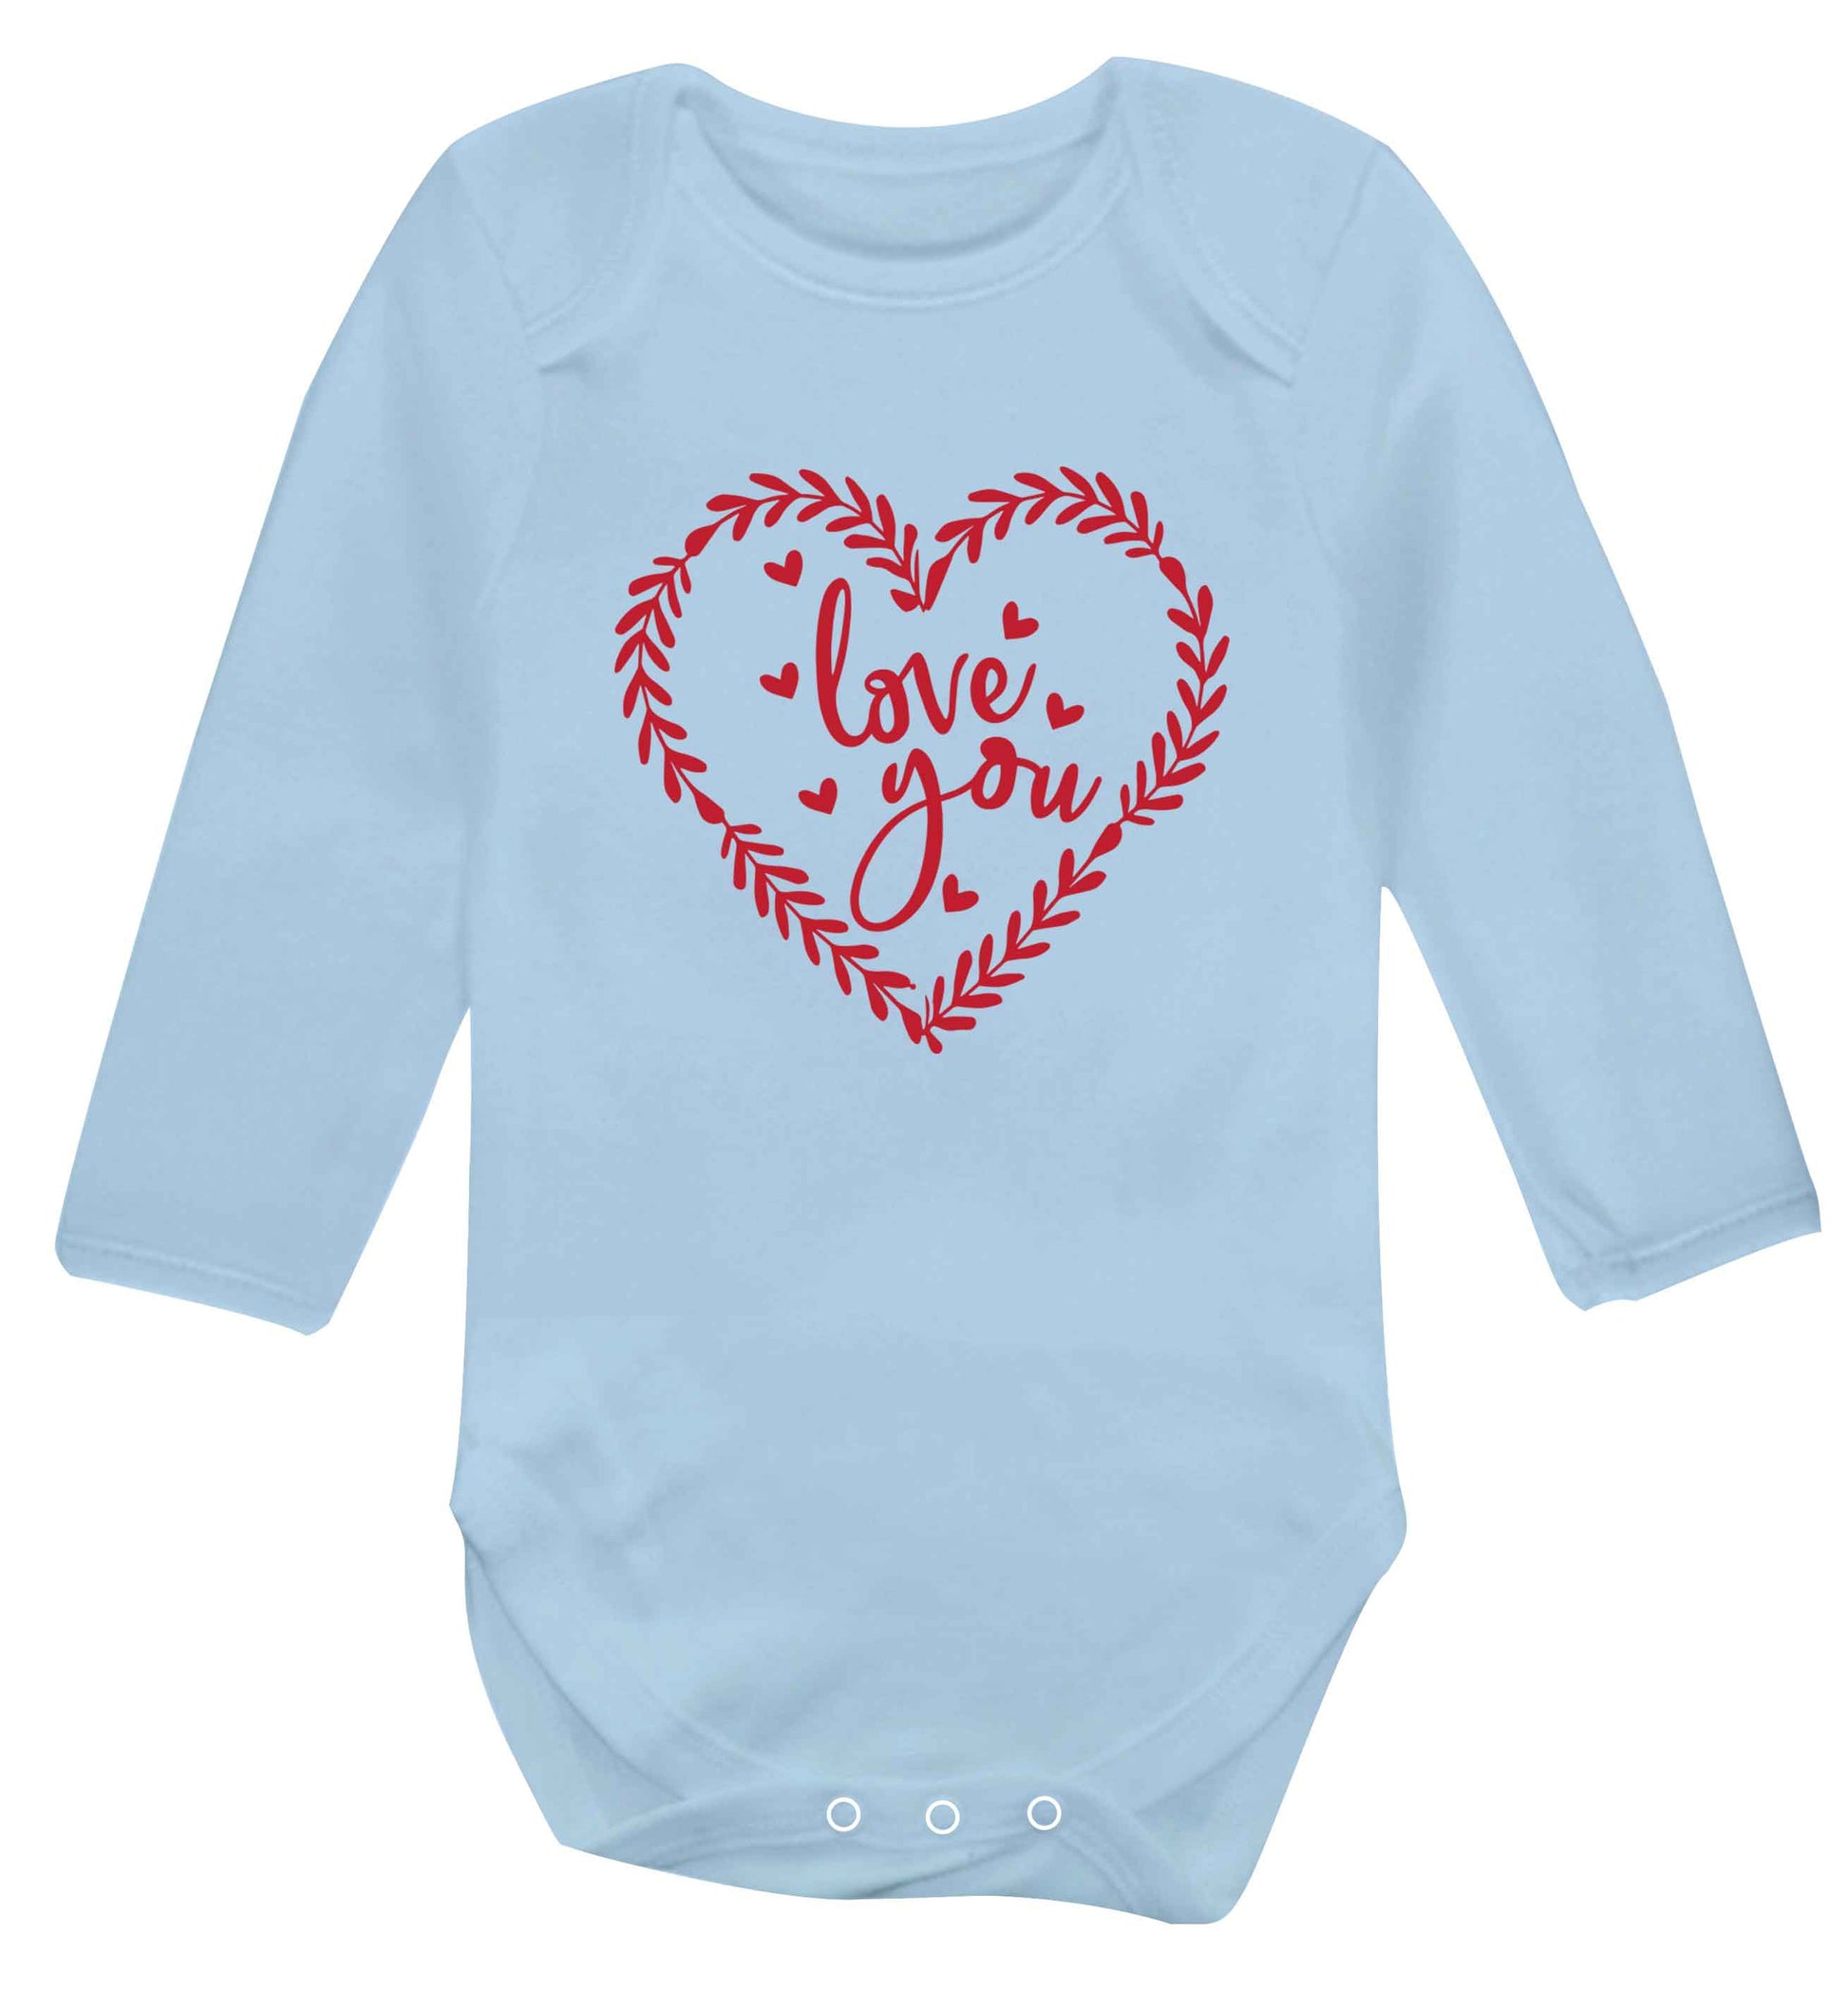 Love you baby vest long sleeved pale blue 6-12 months